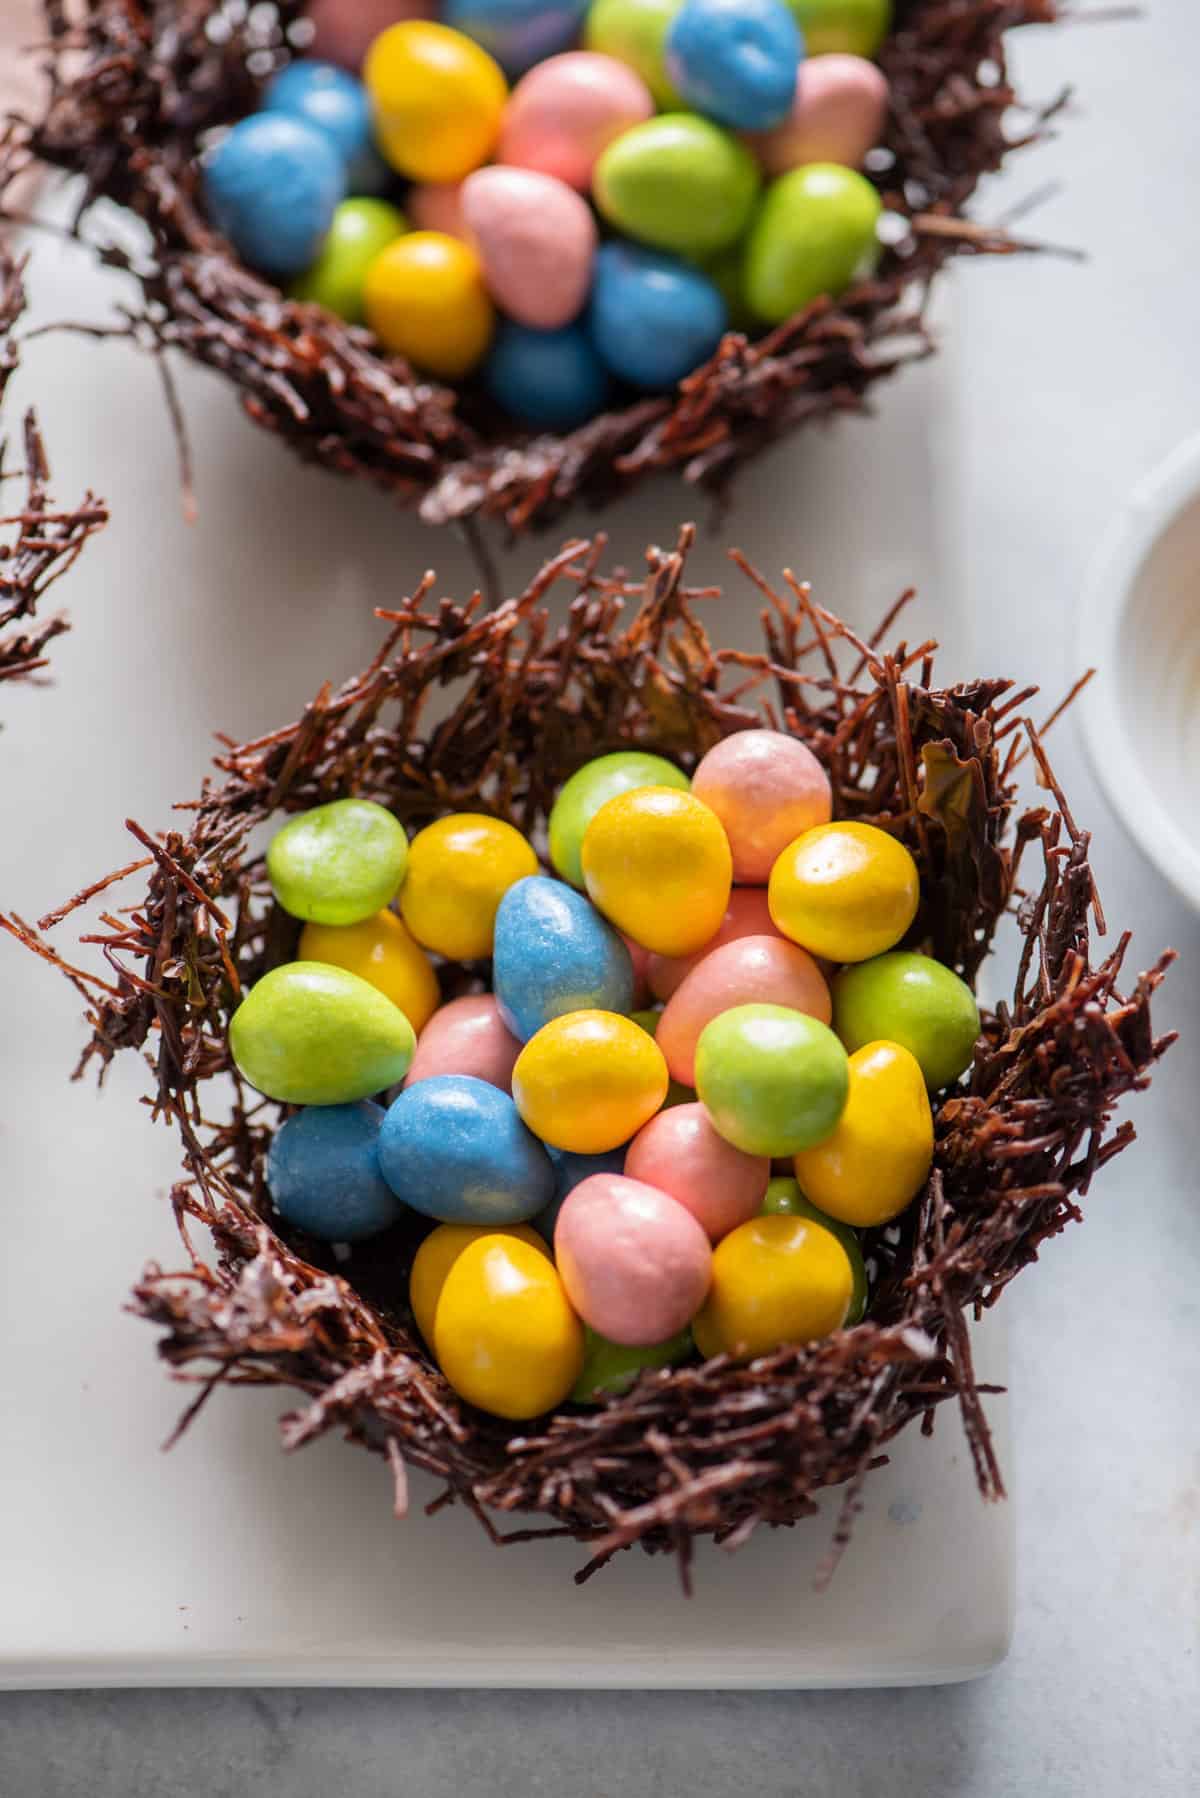 These Easter Chocolate Nest are an adorable treat to make with your kids. They are super cute, fun to make and very delicious. I used vermicelli rice with melted chocolate and molded around a muffin tin to make the nests - such a creative DIY craft idea for children with a fun treat to eat in the end.